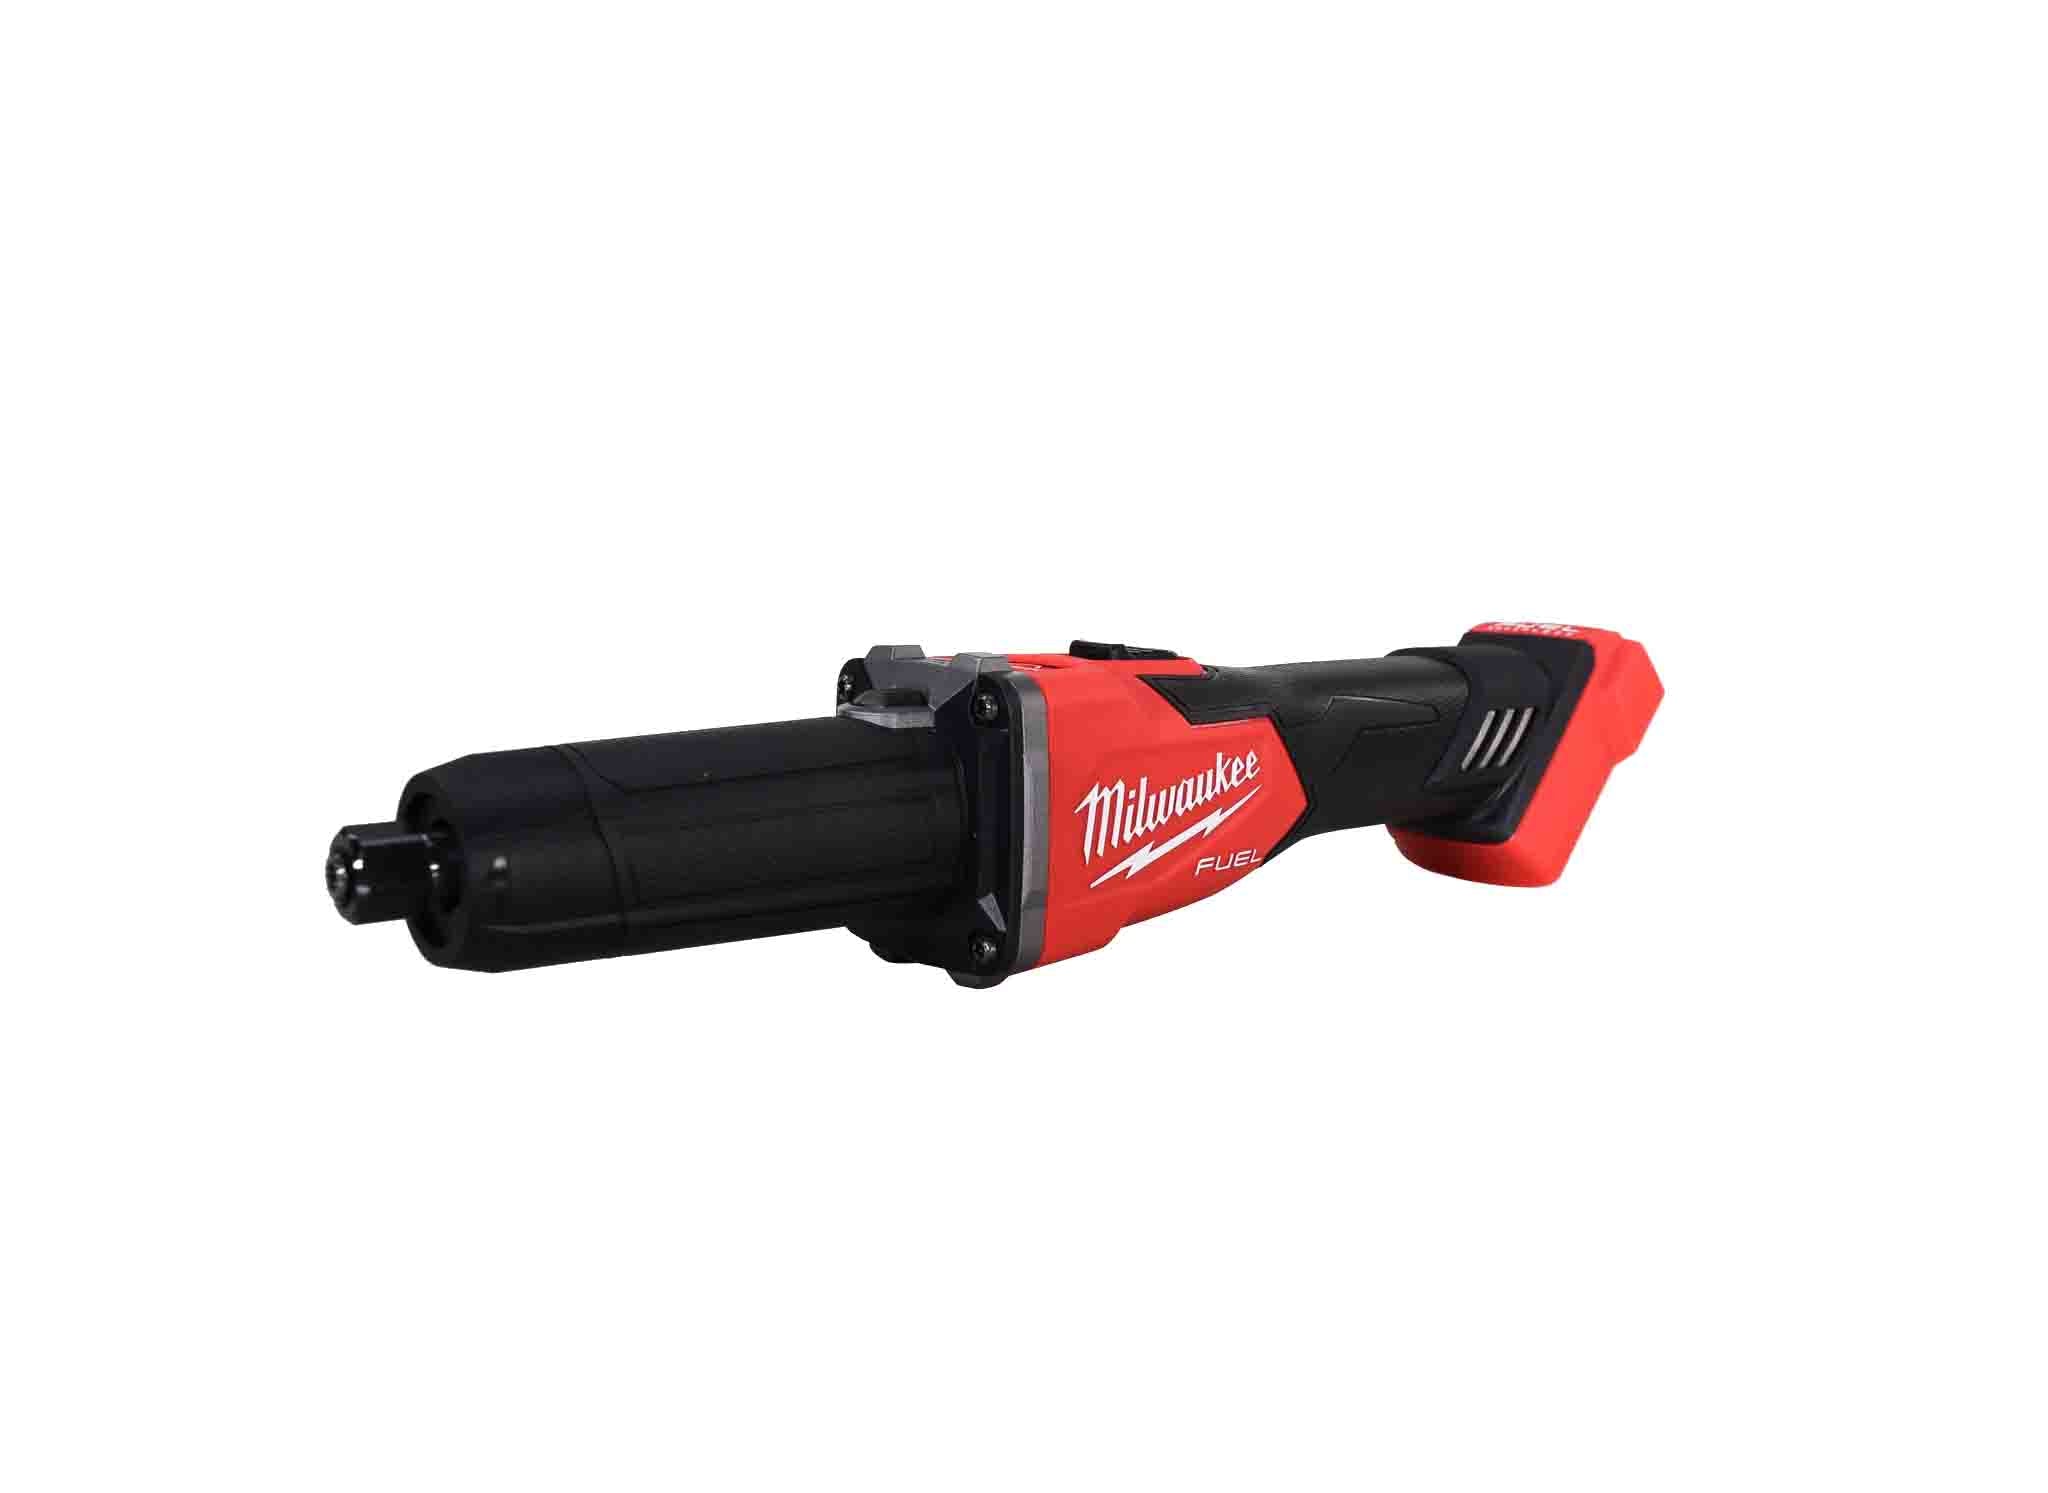 Milwaukee 2939-20 M18 FUEL 18V Lithium-Ion Brushless Cordless 1/4 in. Braking Die Grinder Slide Switch (Tool-Only)